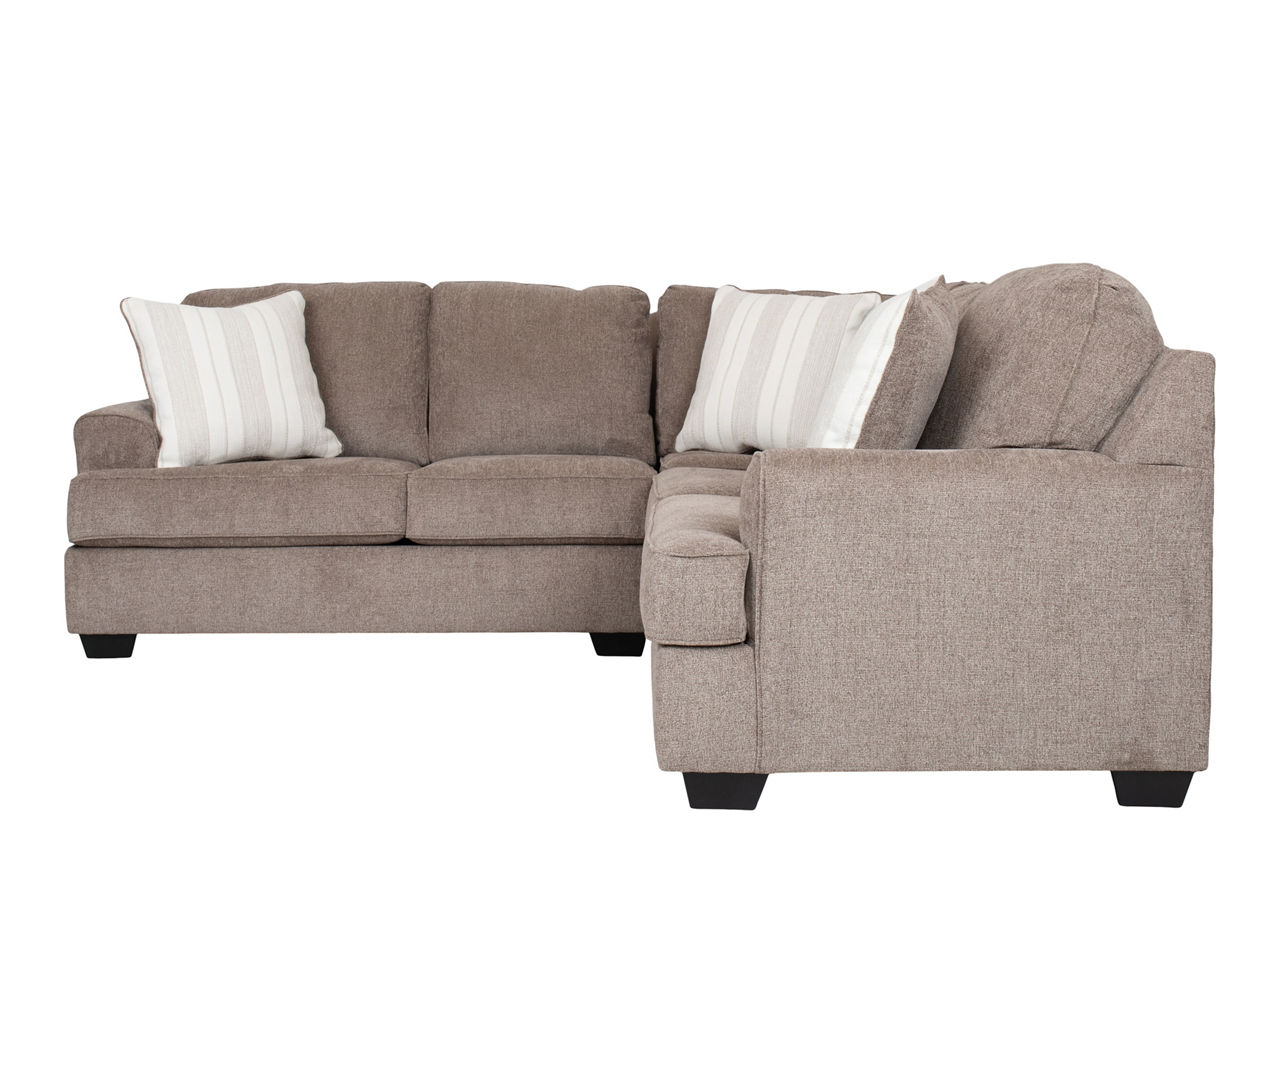 Broyhill McRay Pewter Sectional